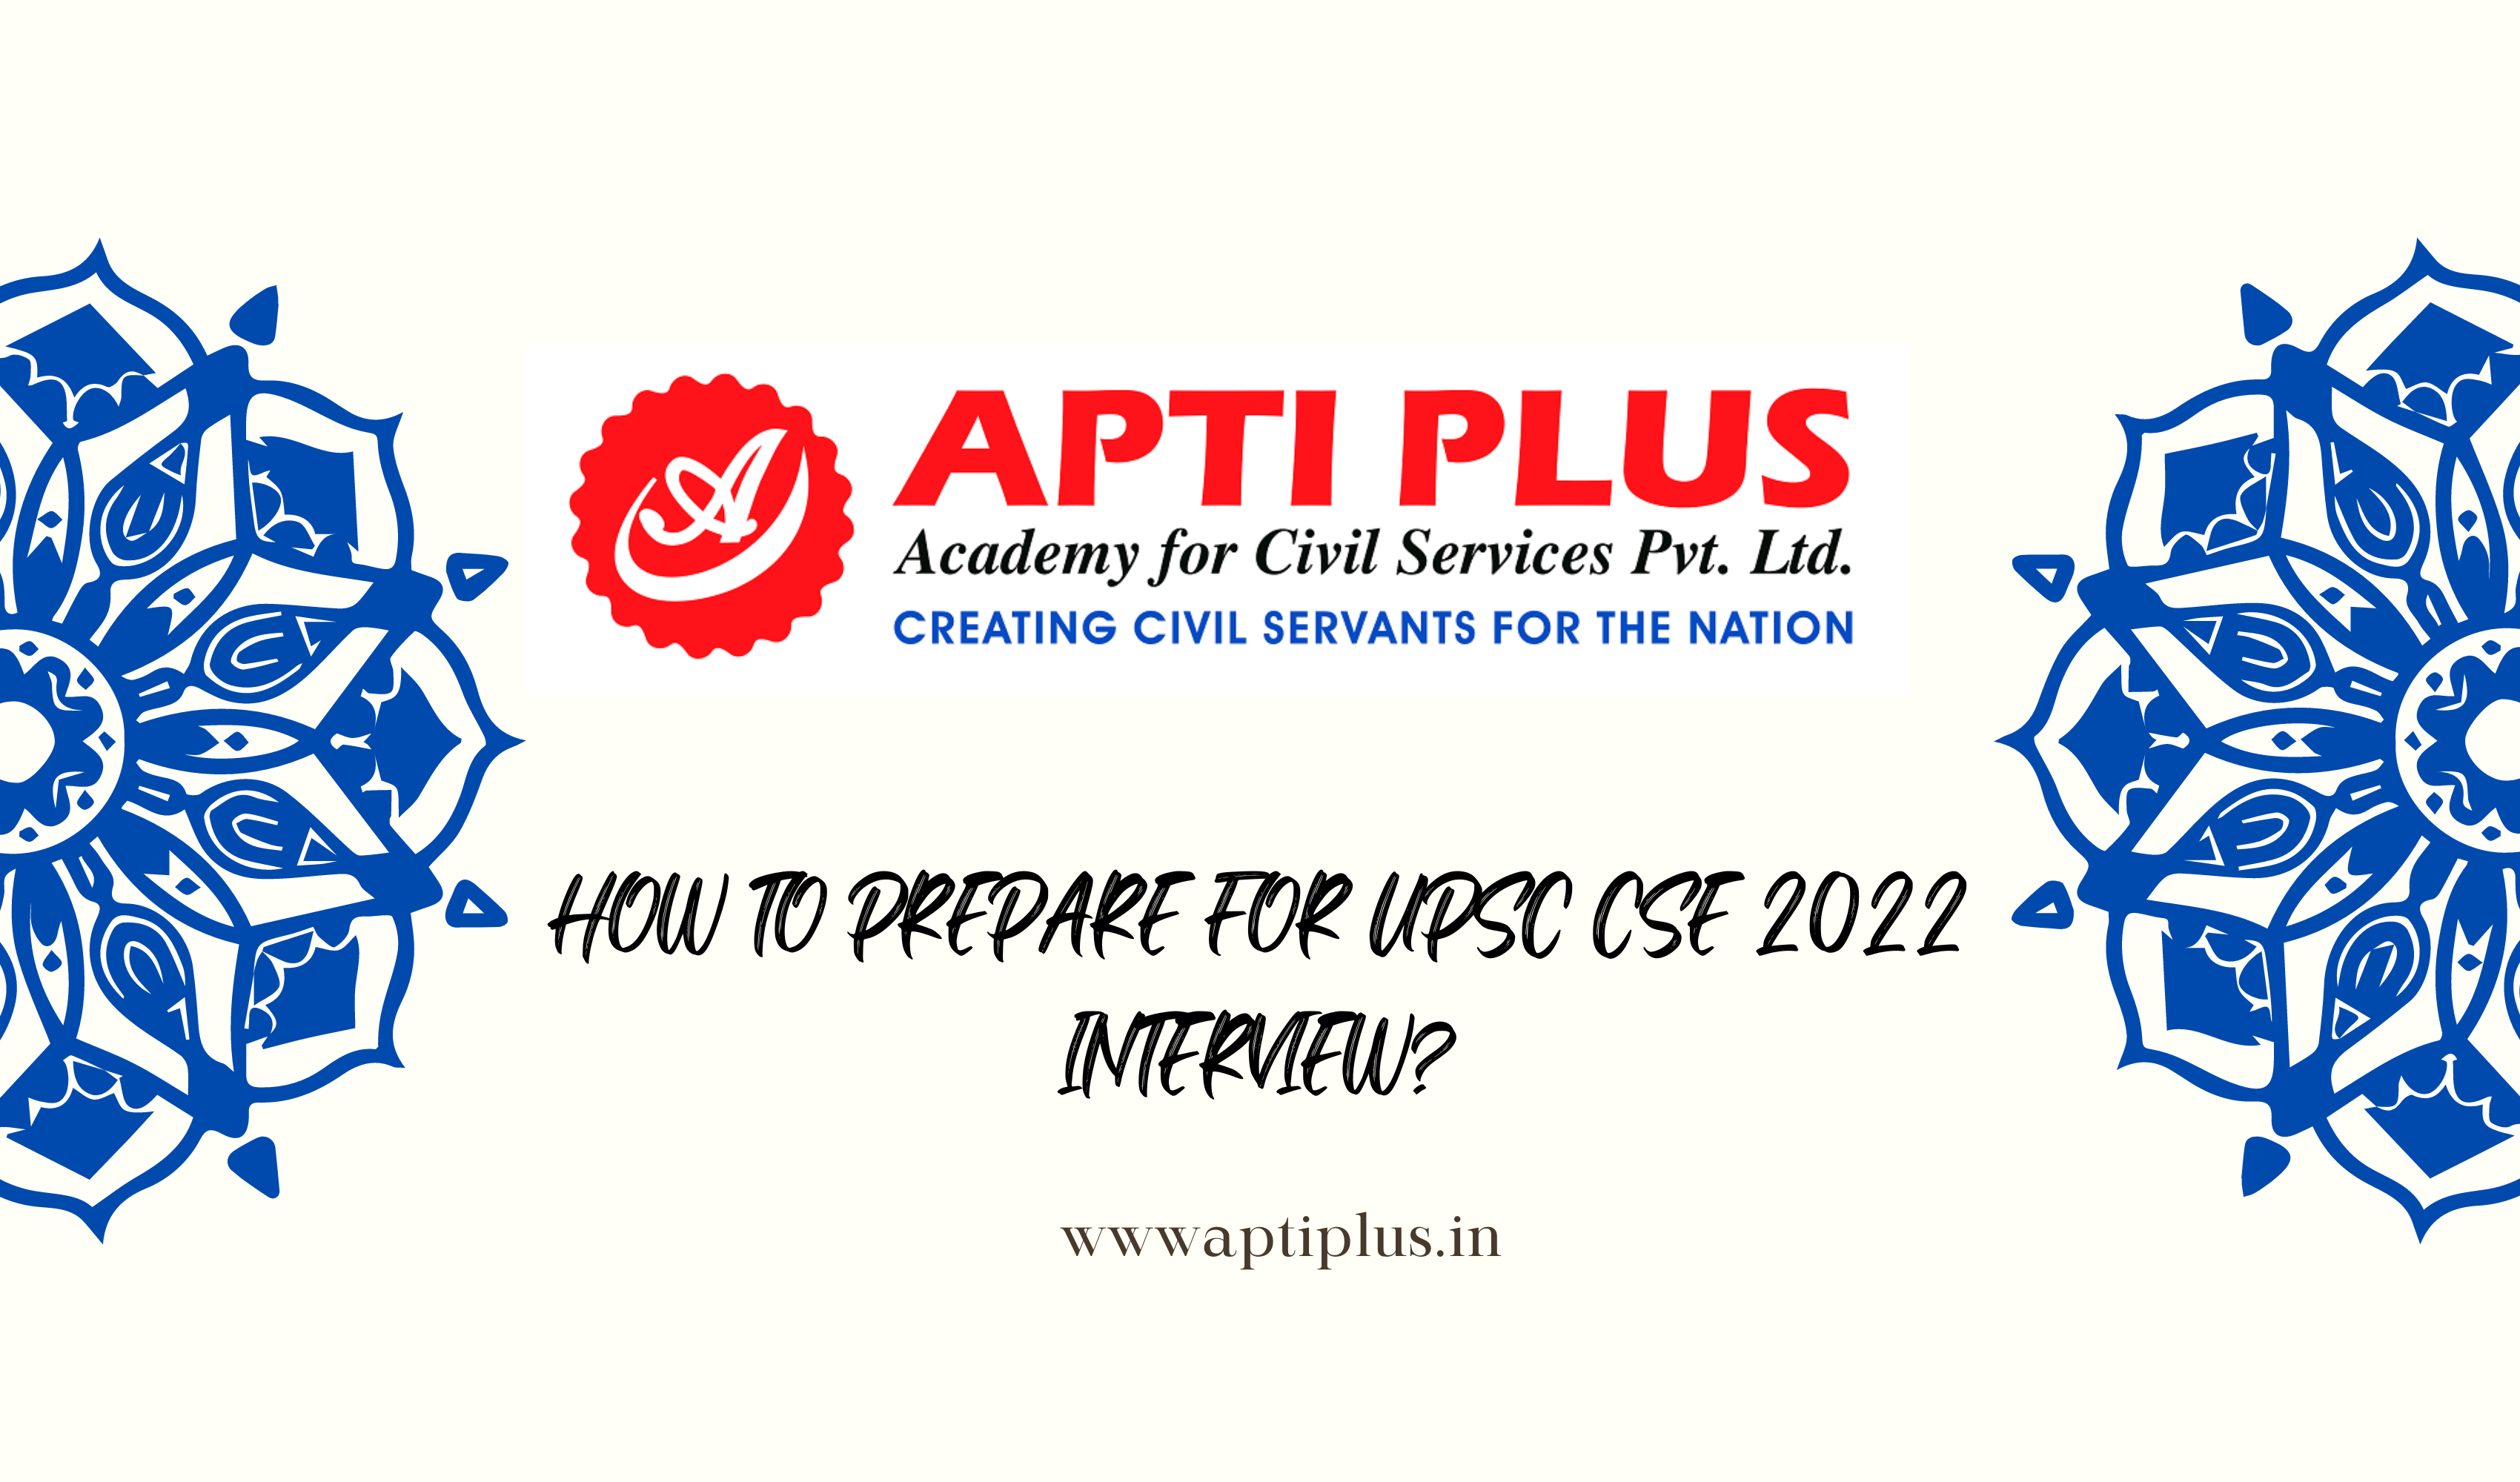 How To Prepare for UPSC CSE 2022 Interview?